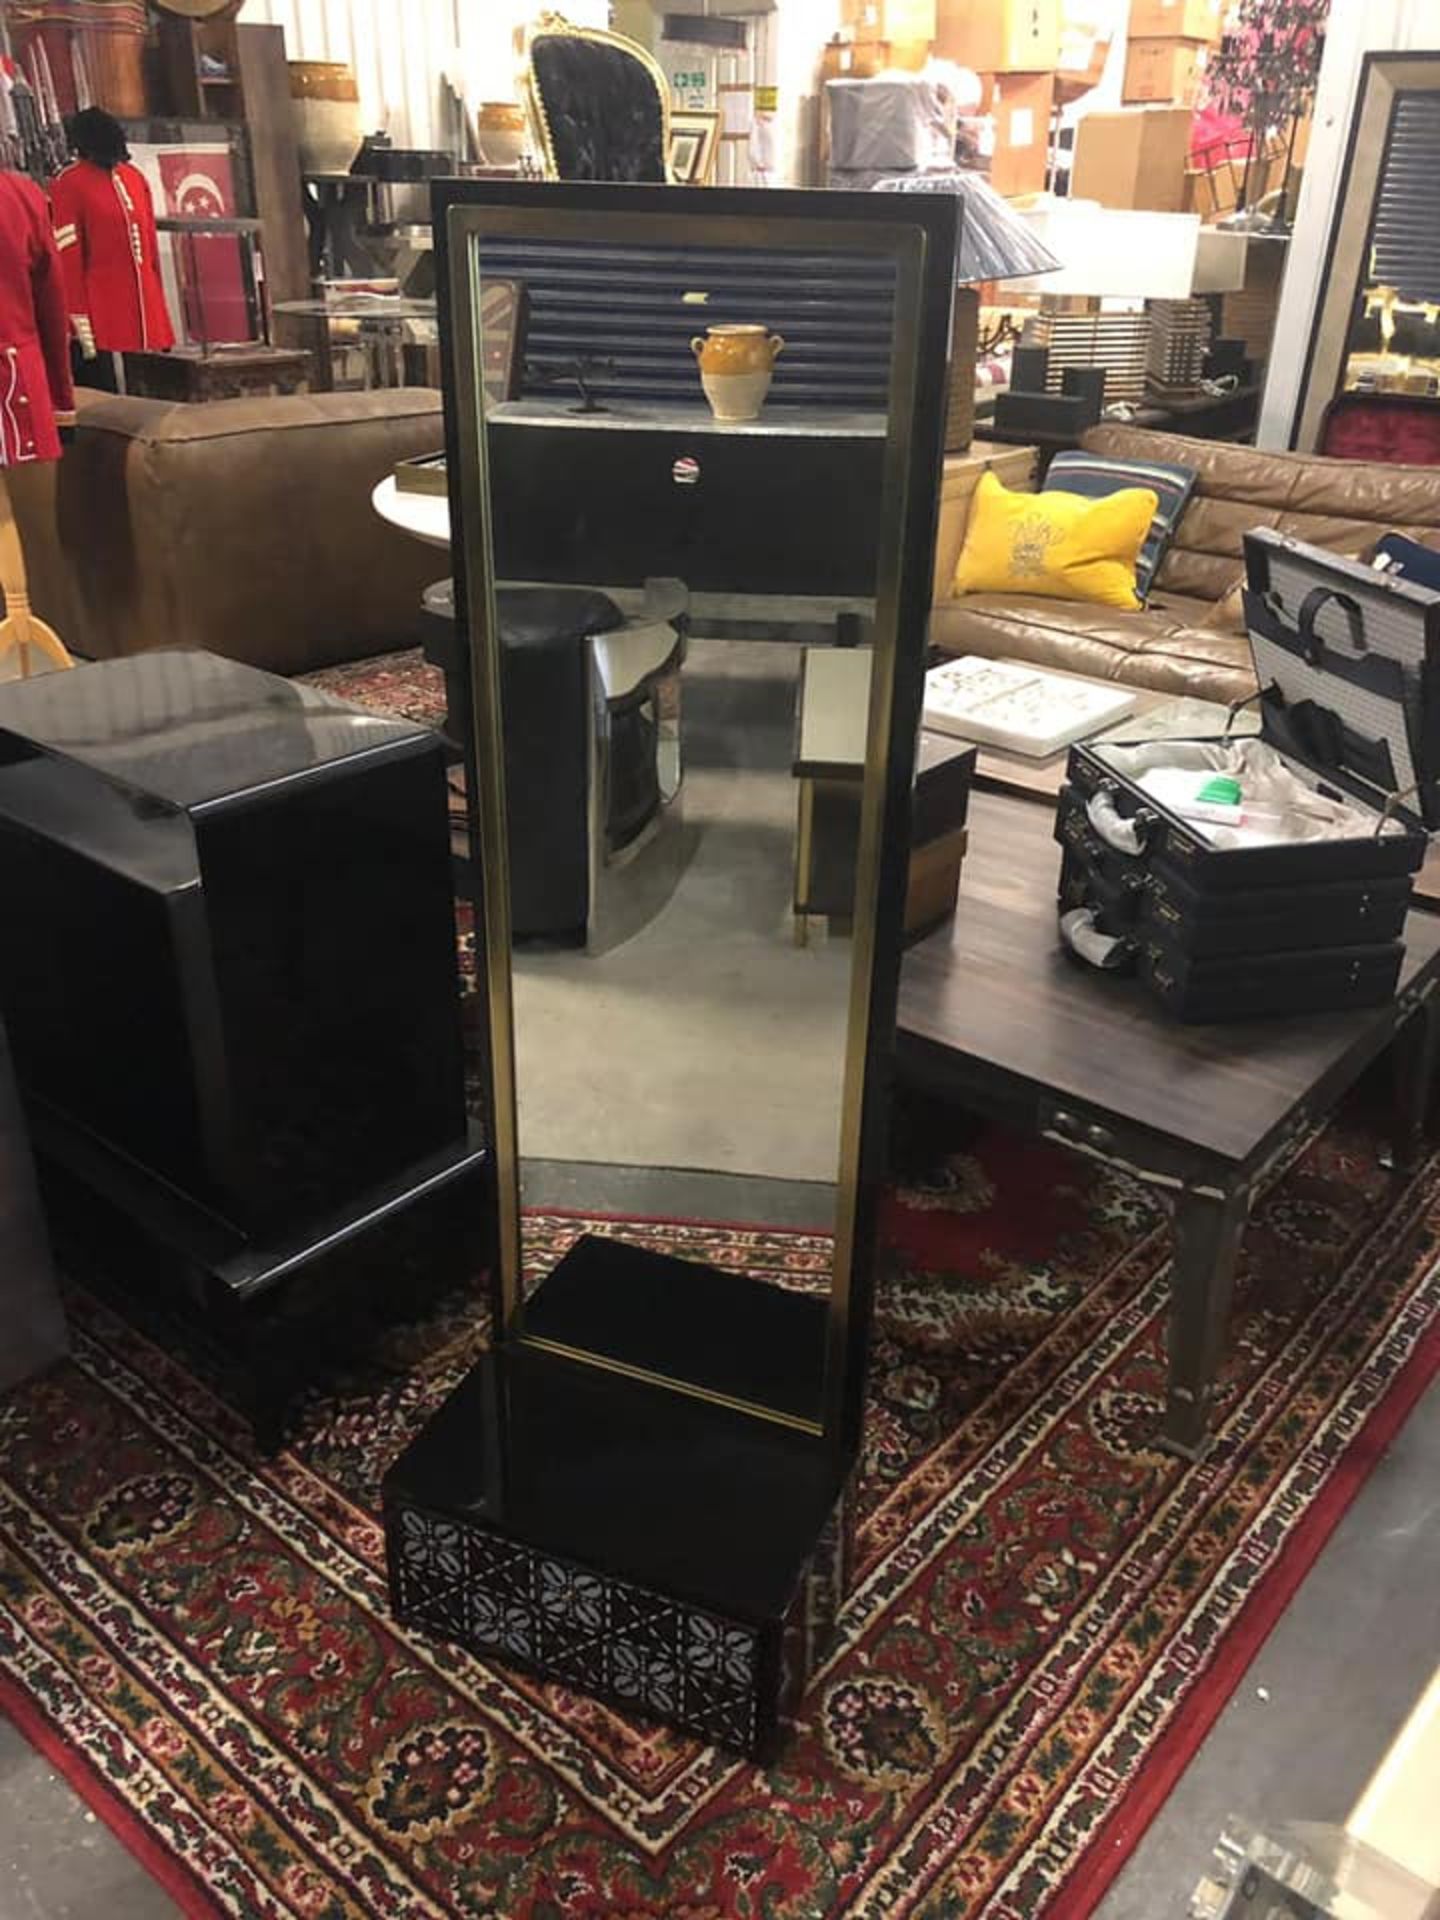 Shellshock Floating Mirror Nightstand Designed By Tracey Boyd The Lacquer Black Clean-Lined And